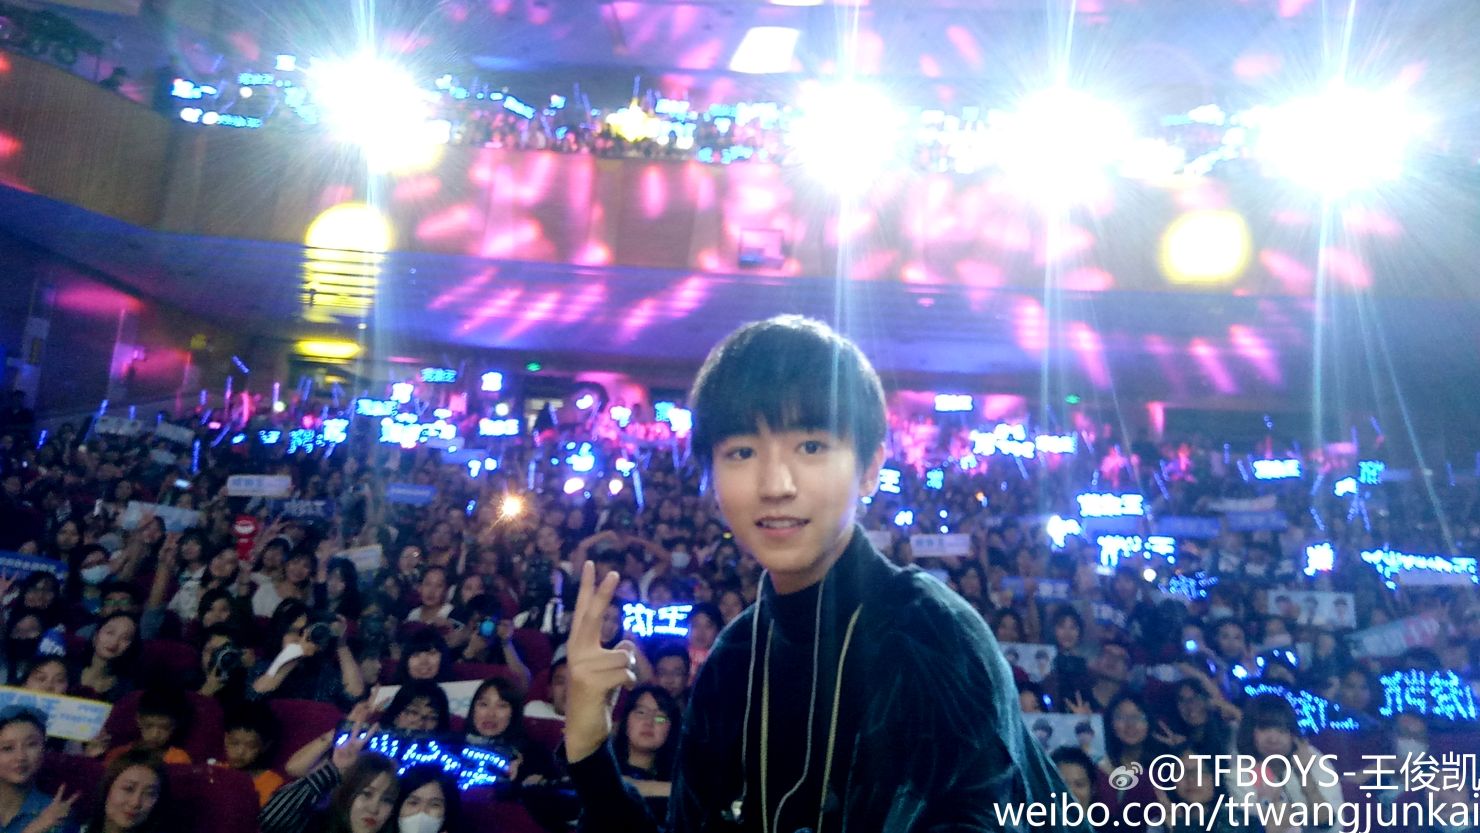 Wang Junkai, lead singer of Chinese boy band TFboys, surrounded by fans during his birthday celebration. 